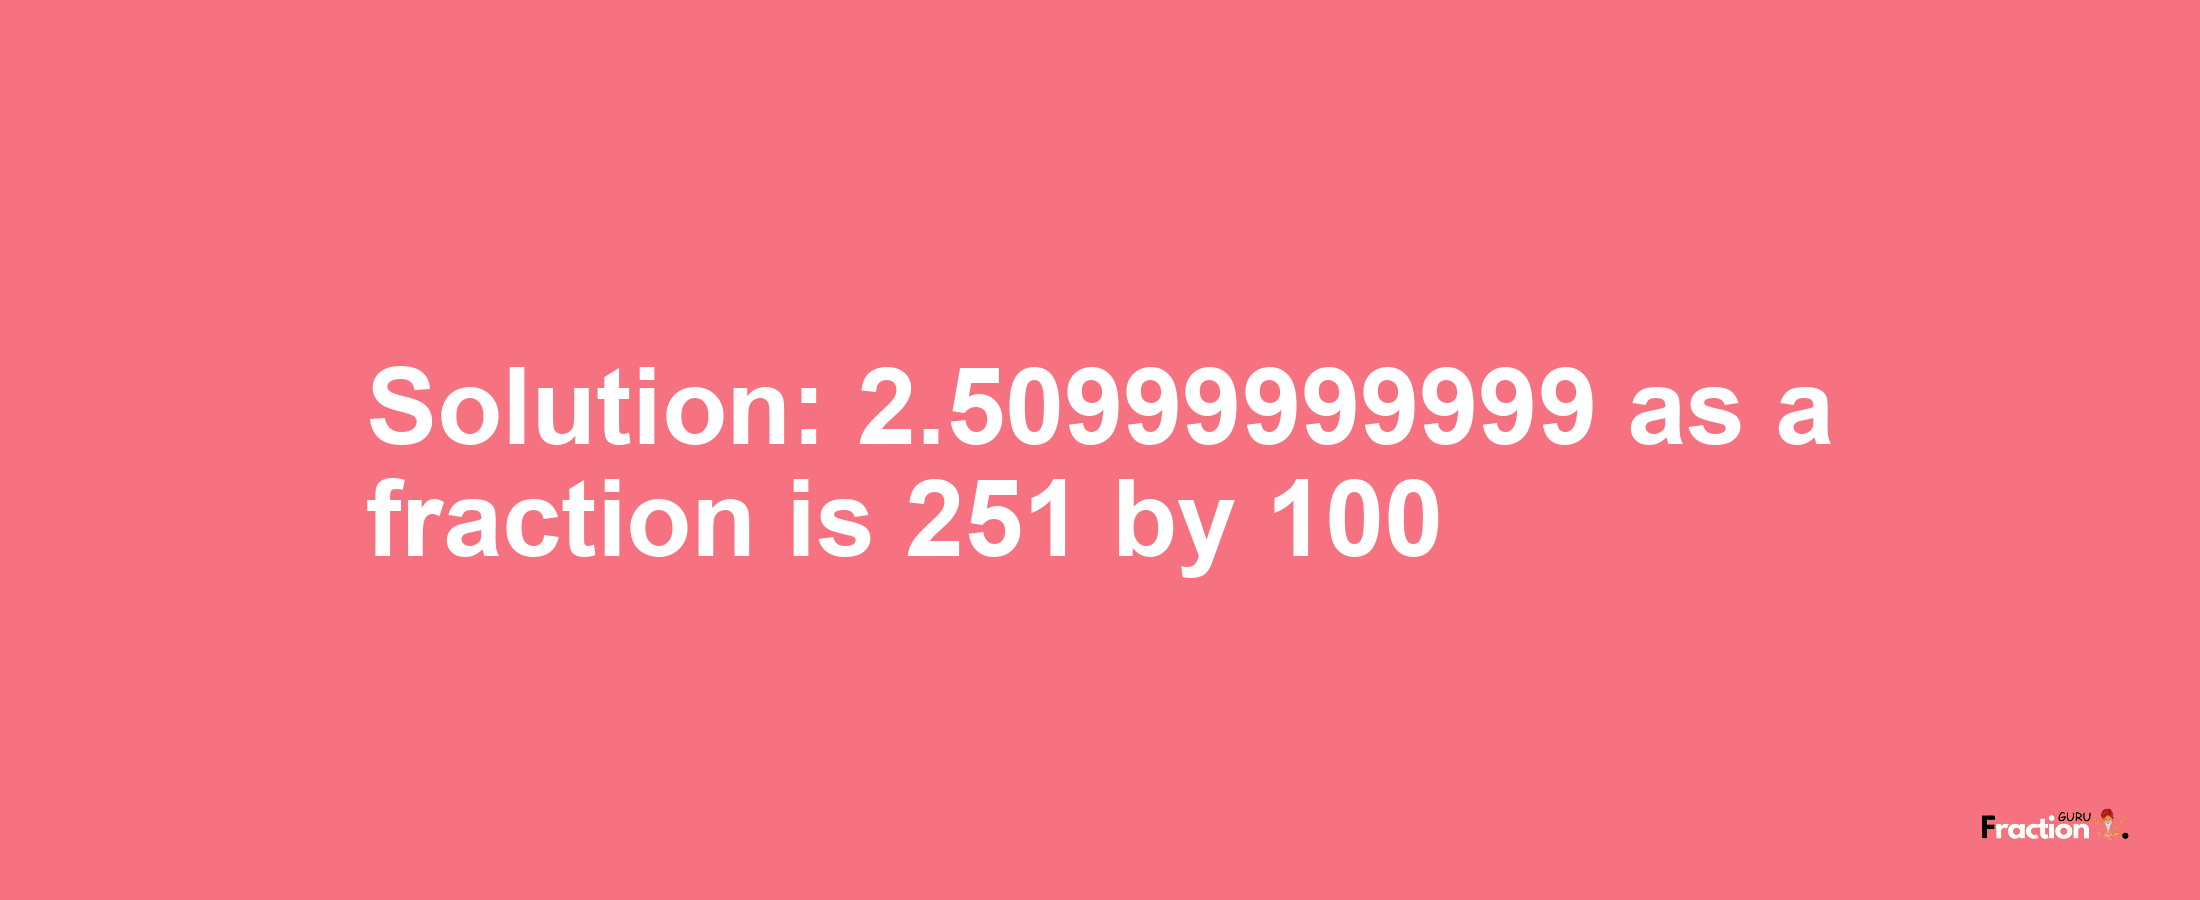 Solution:2.50999999999 as a fraction is 251/100